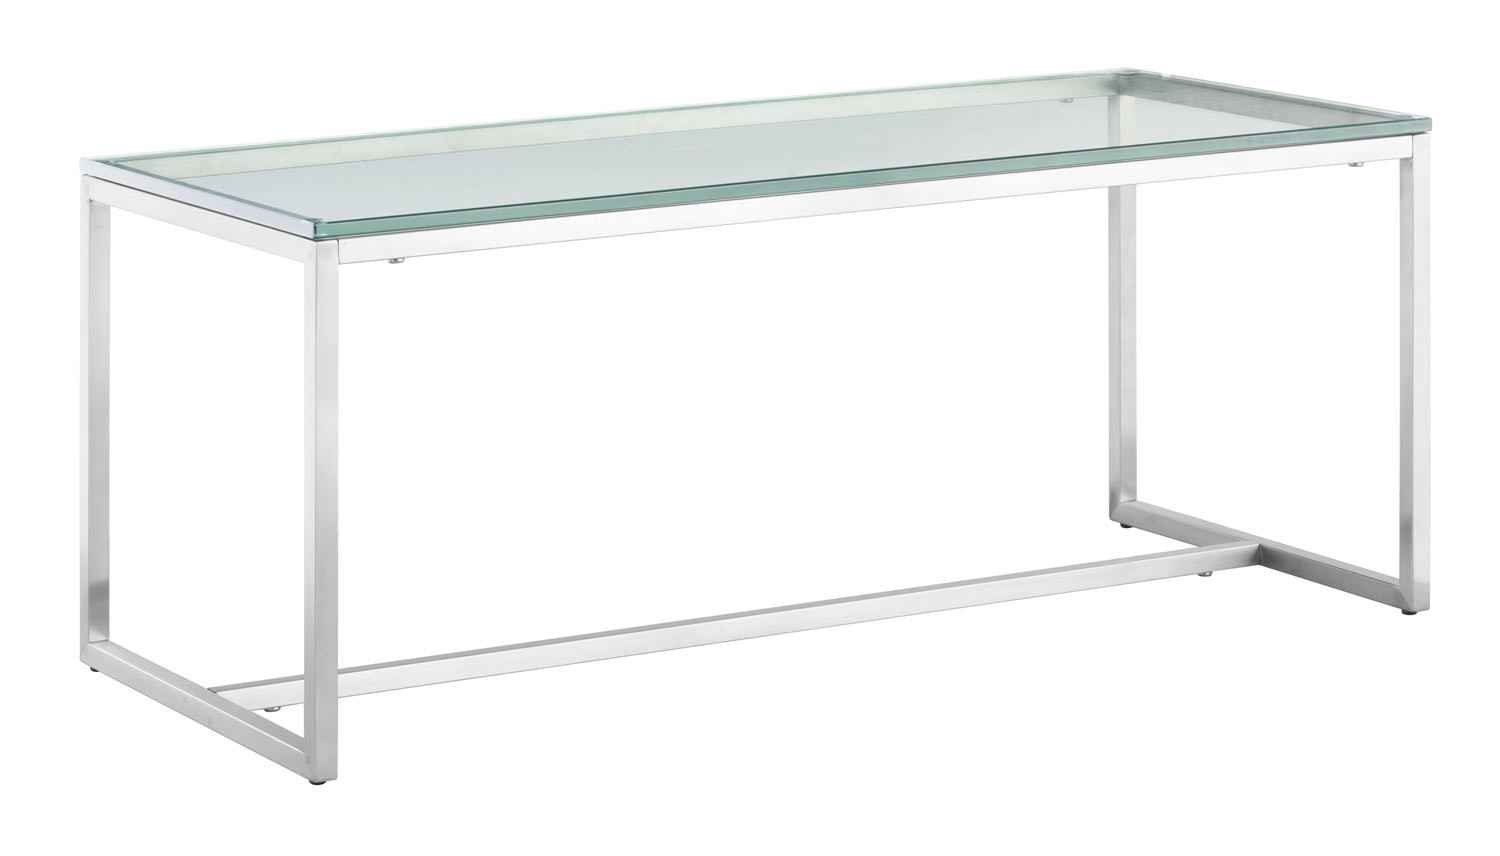 Zuo Modern Sprocket Coffee Table - Brushed Stainless